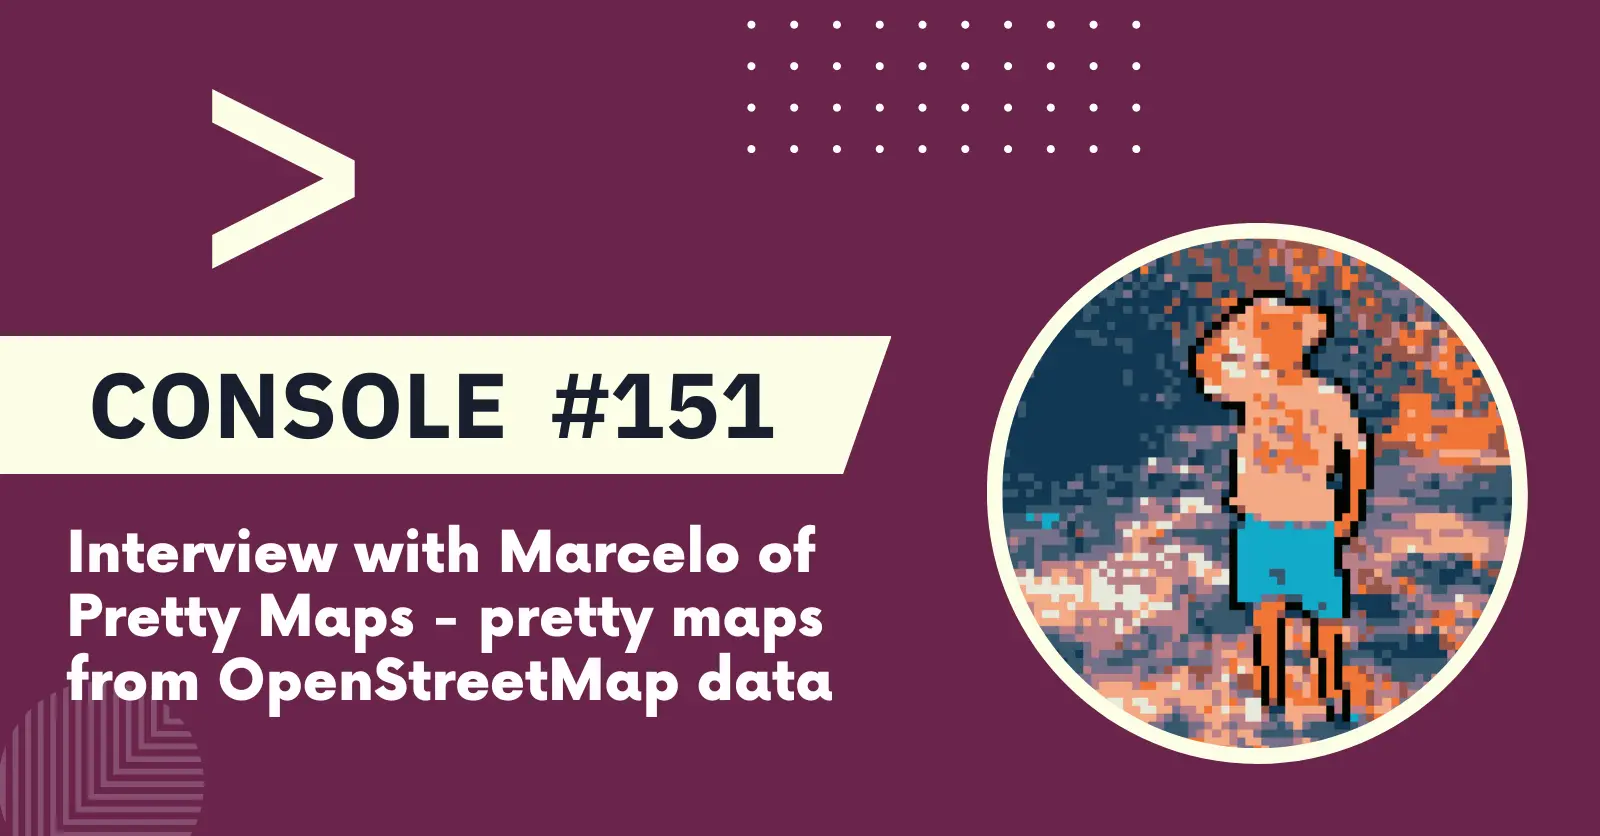 Interview with Marcelo of Pretty Maps - Draw pretty maps from OpenStreetMap data